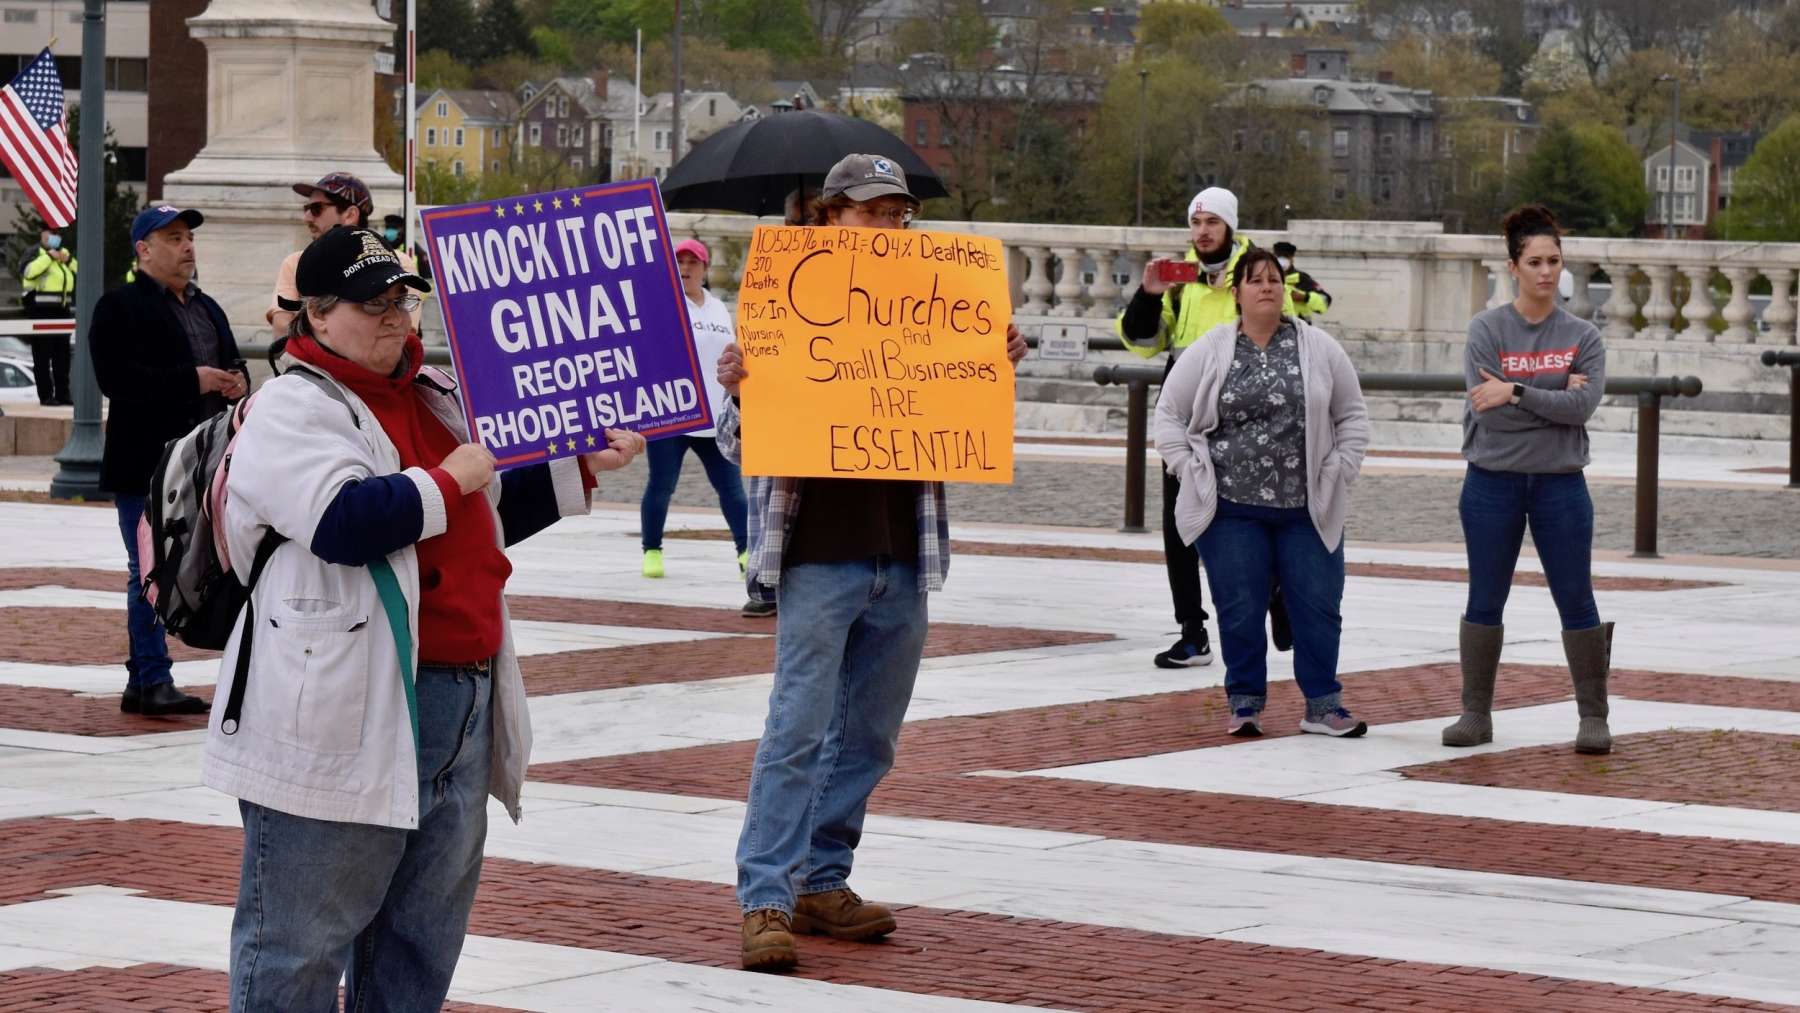 Rhode Island News: Rally to Reopen RI draws few protesters